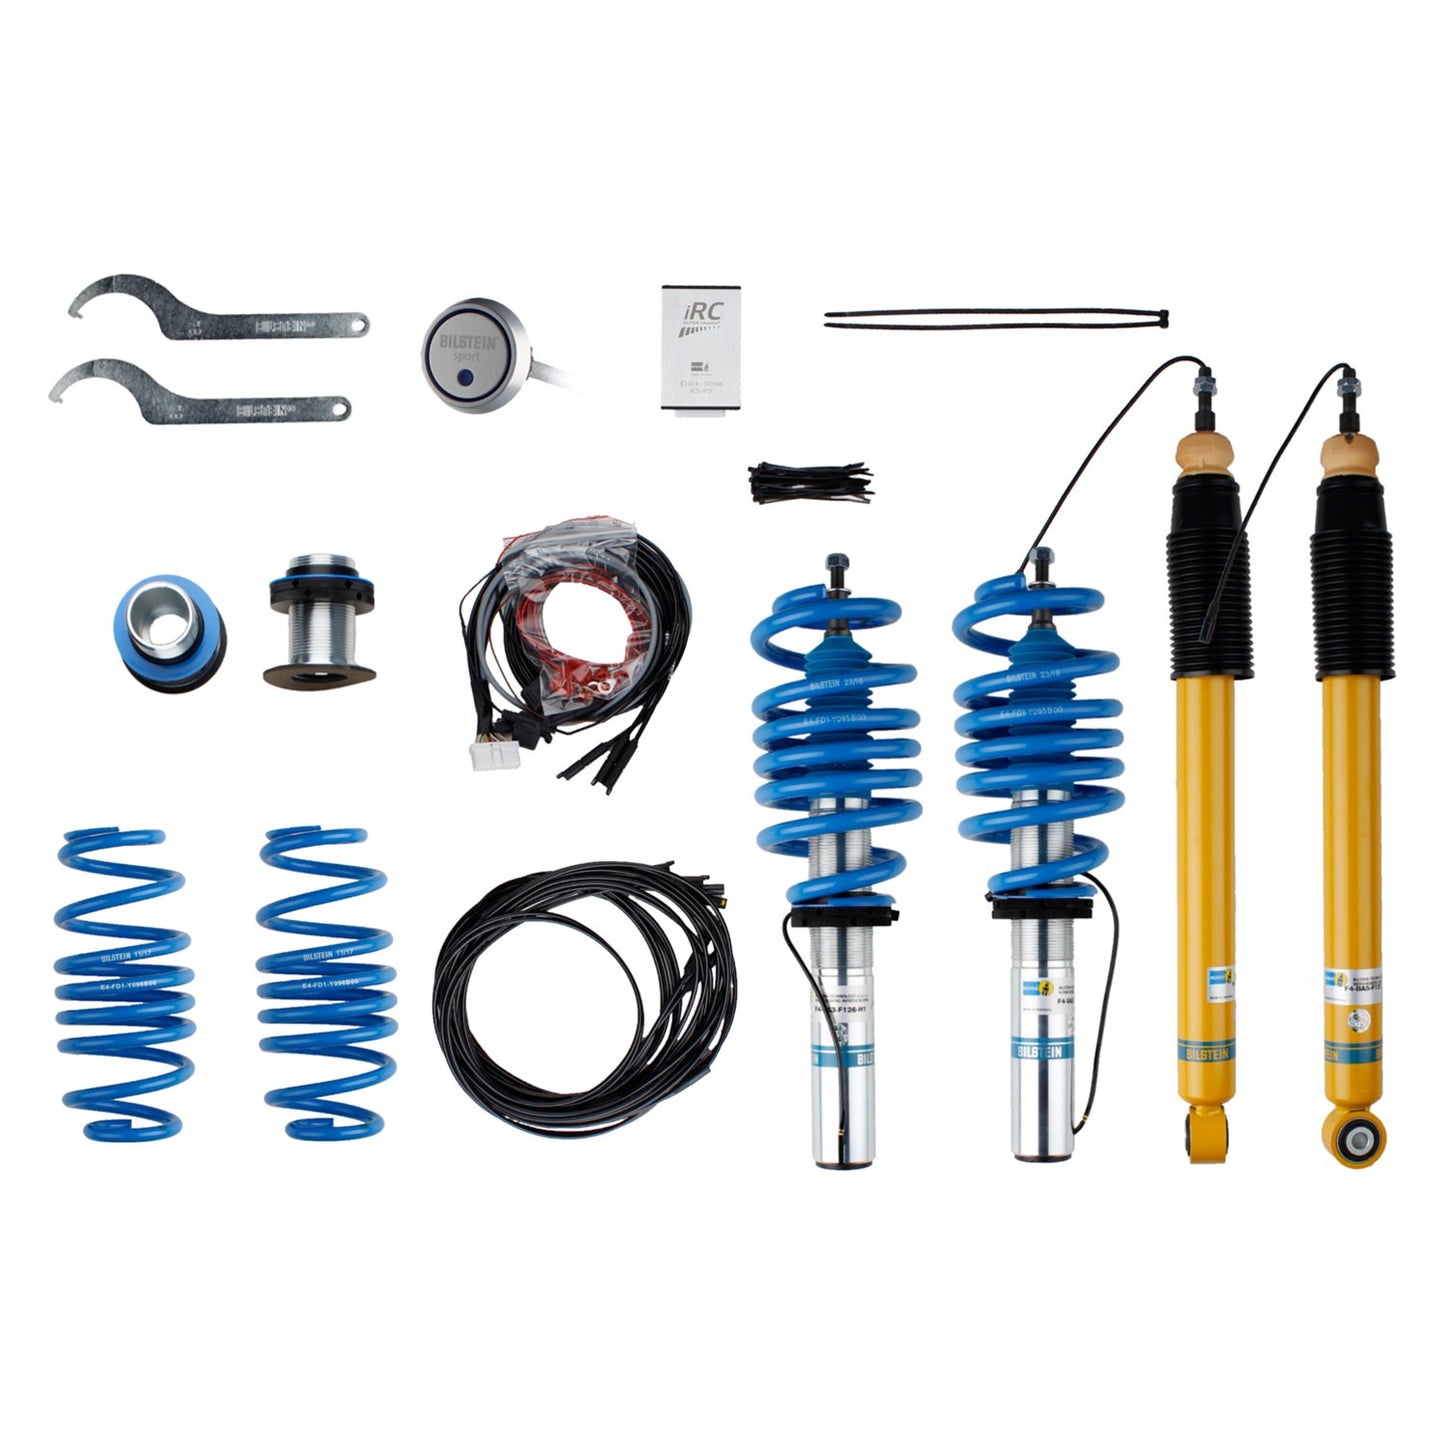 Audi Bilstein - 0.4"-1.2" x 0.4"-0.8" B16 Series iRC Front and Rear Lowering Coilover Kit - 49-250534